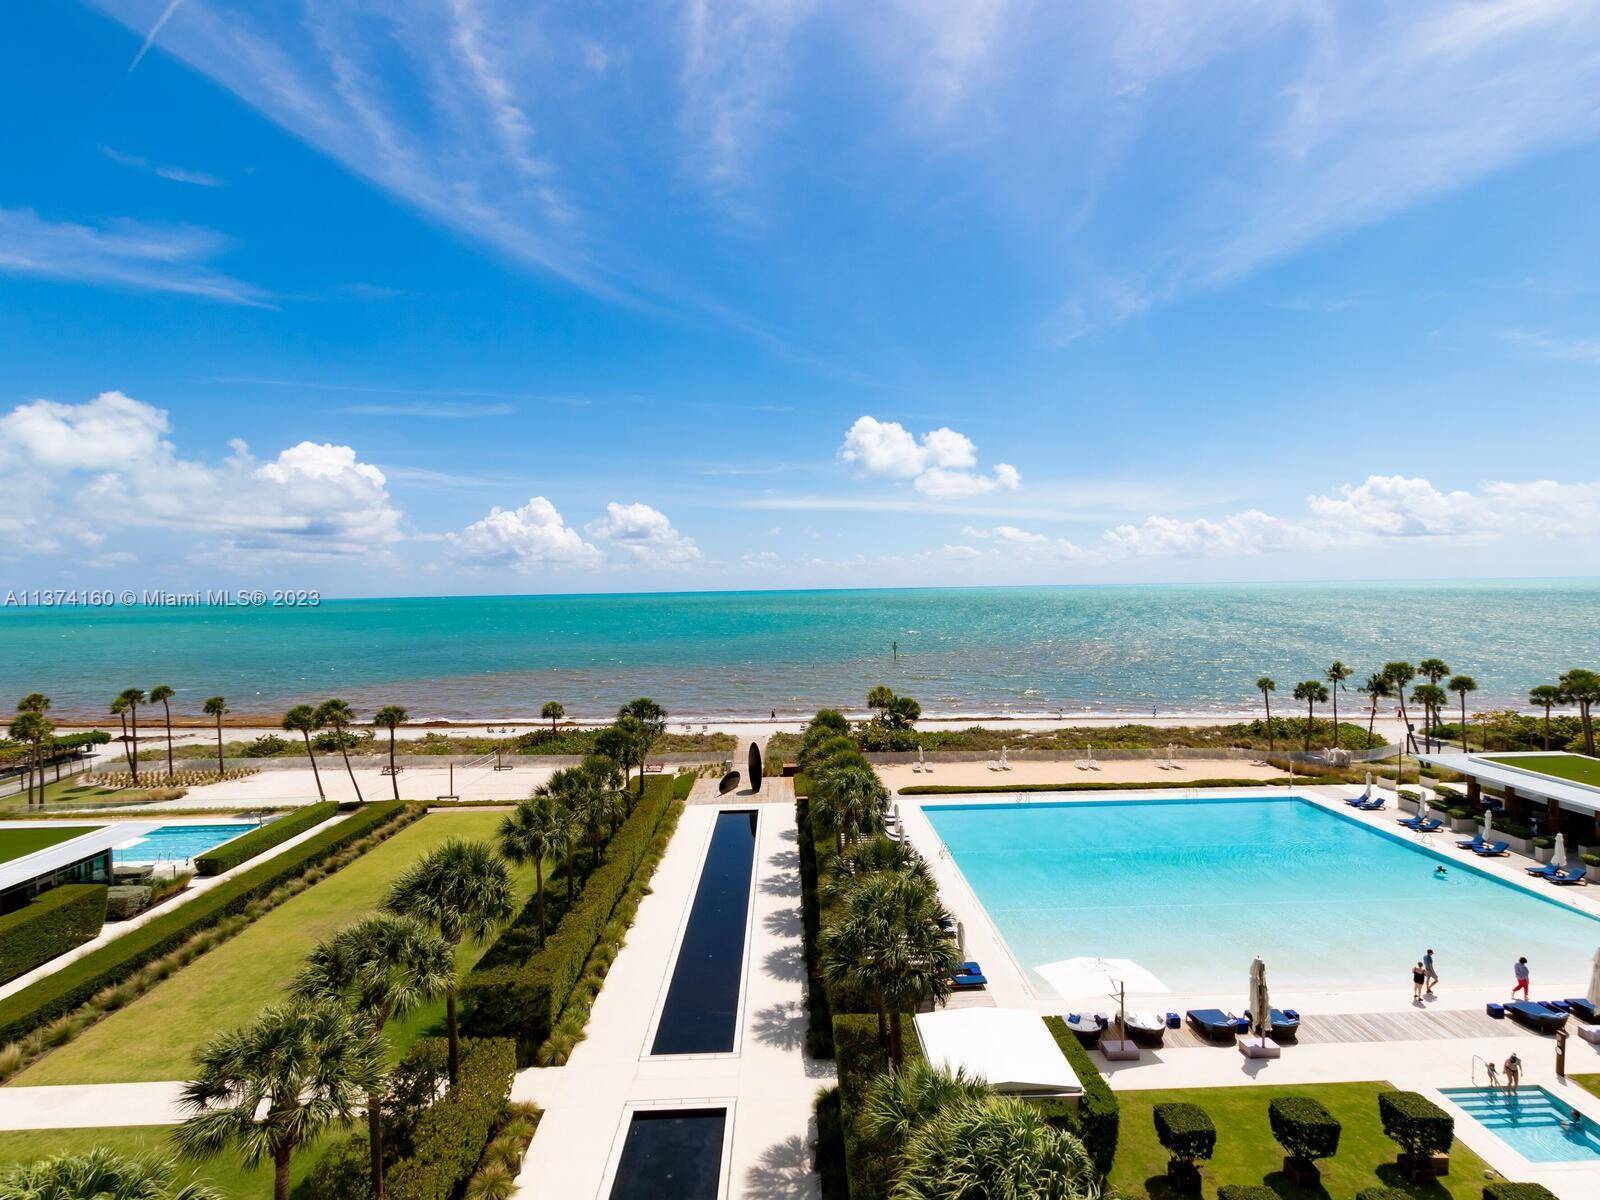 Stunning unobstructed oceanfront city views in this unique, tastefully decorated property at the exclusive Oceana in Key Biscayne.